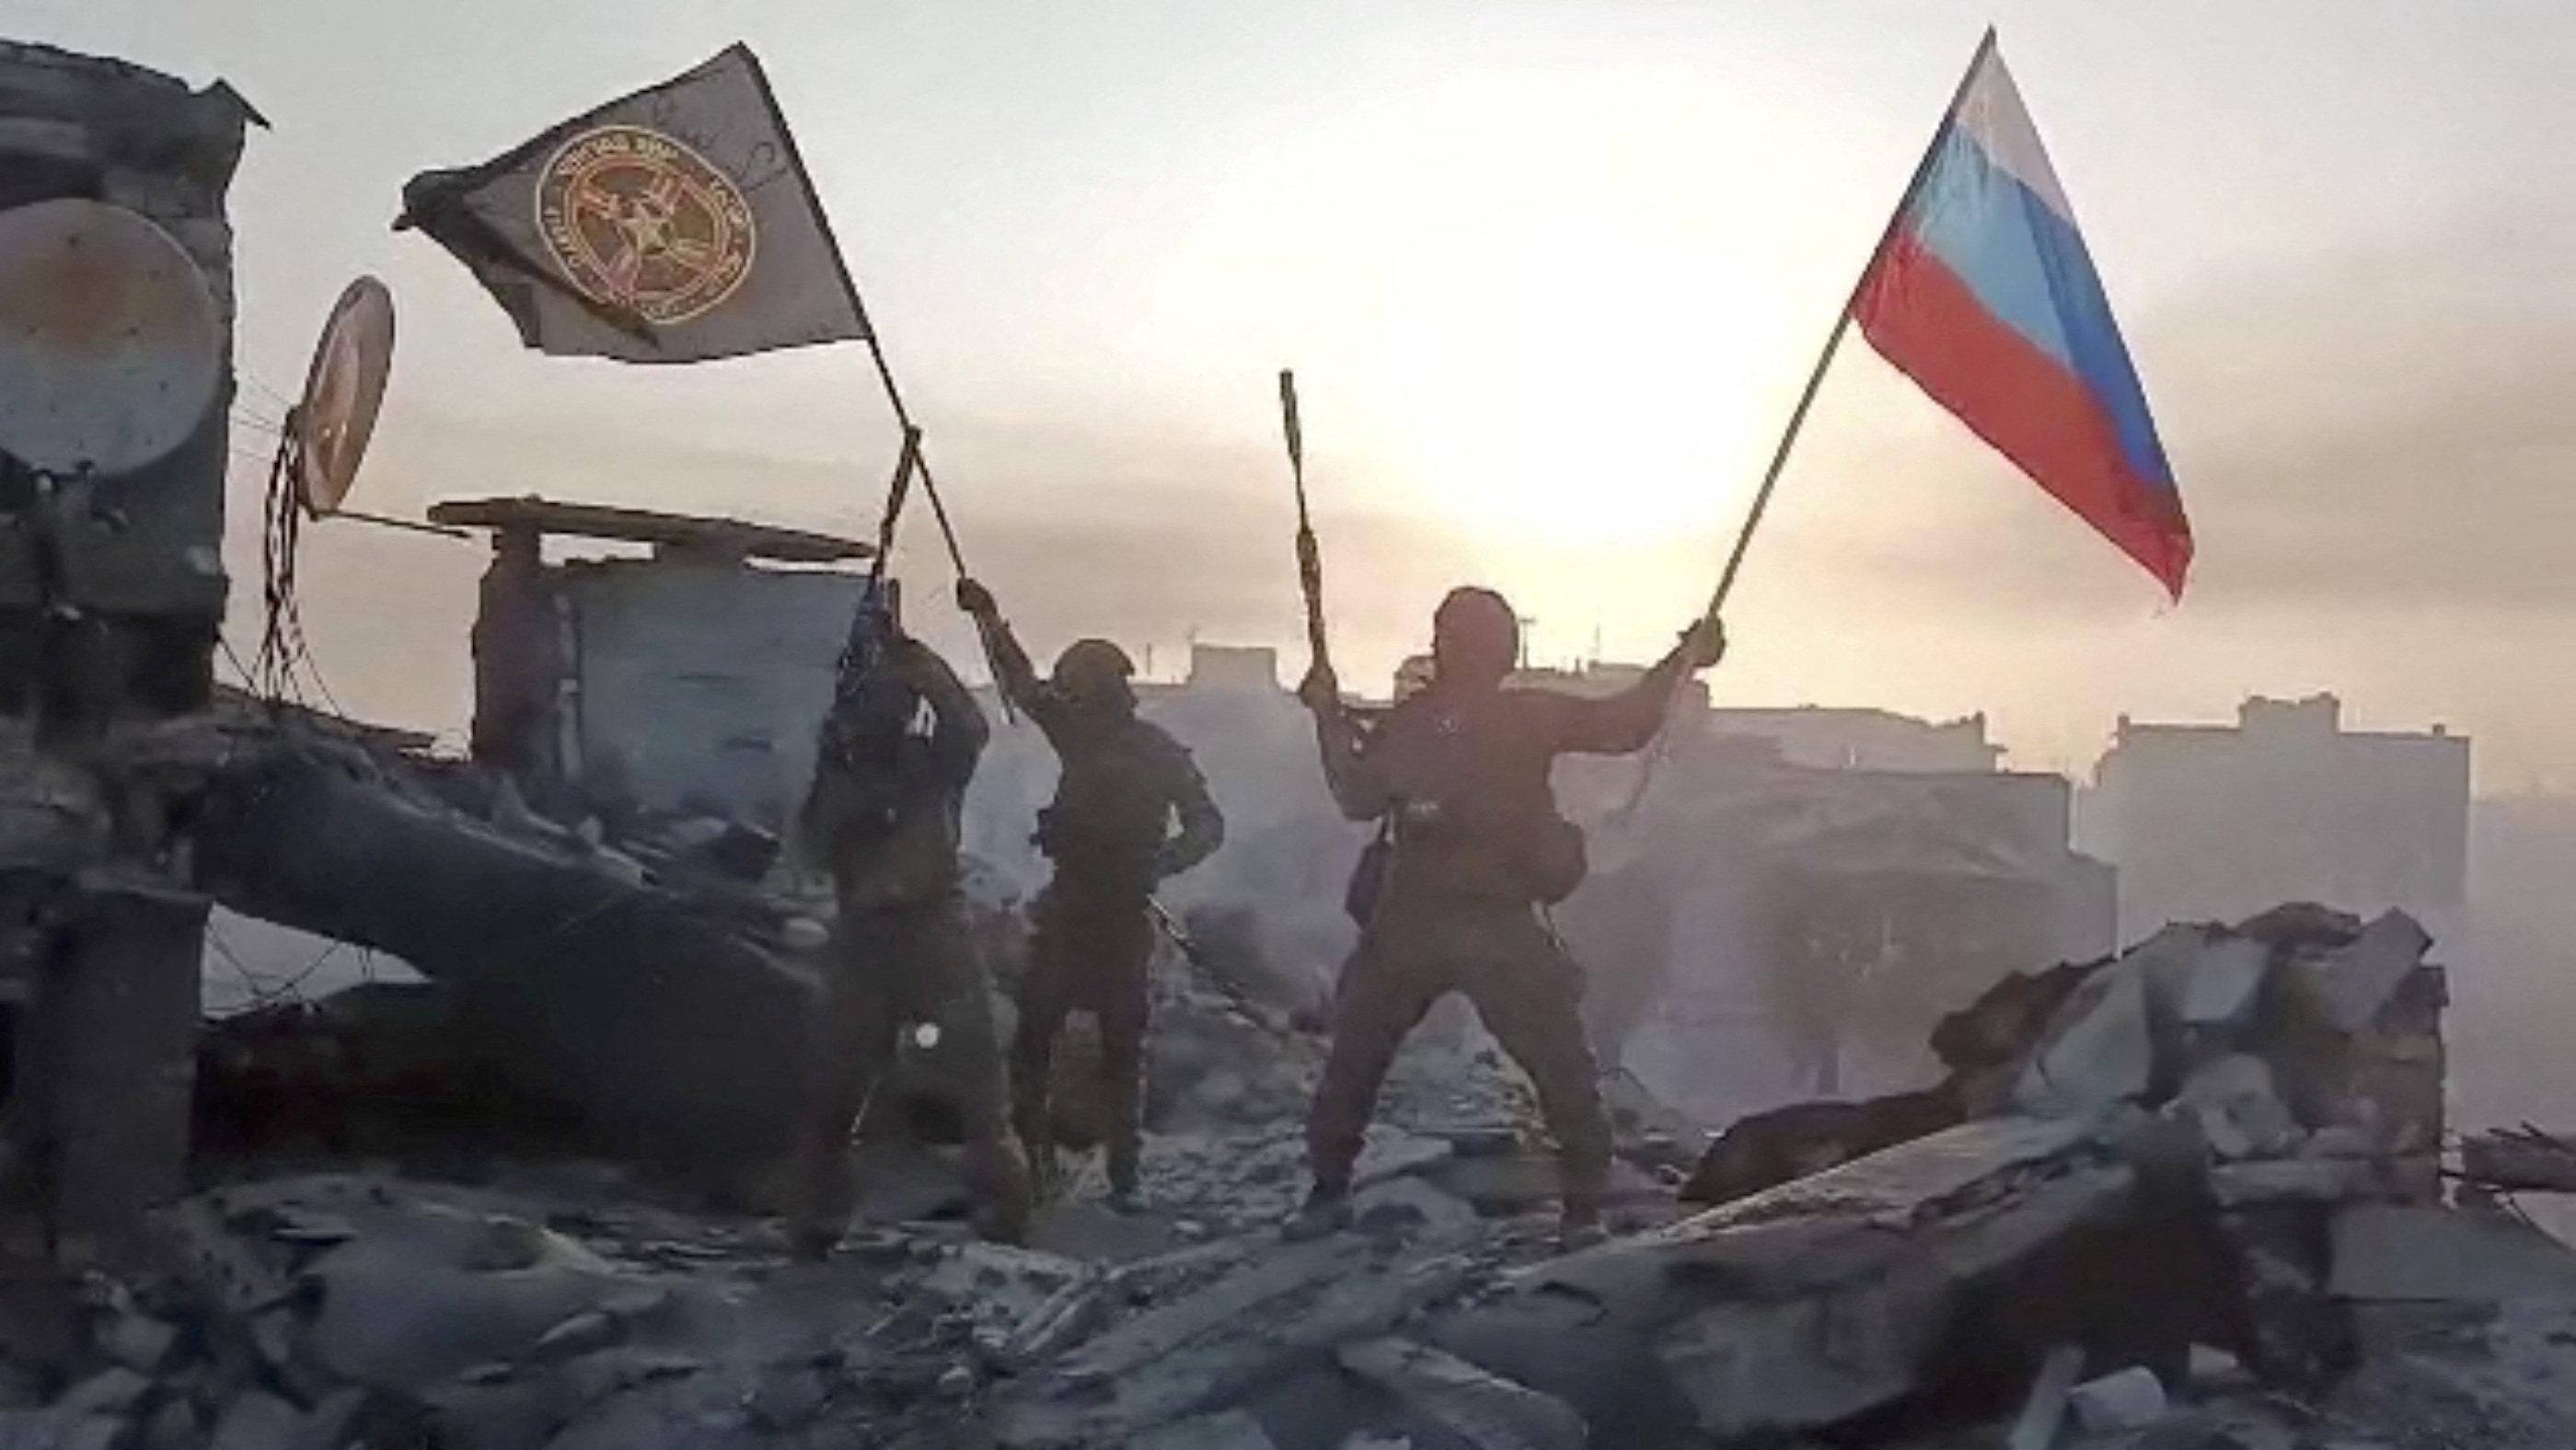 Members of Wagner group wave a Russian flag and Wagner Group’s flag on the rooftop of a damaged building in Bakhmut, Ukraine. Photo: Telegram channel of Concord group via AFP